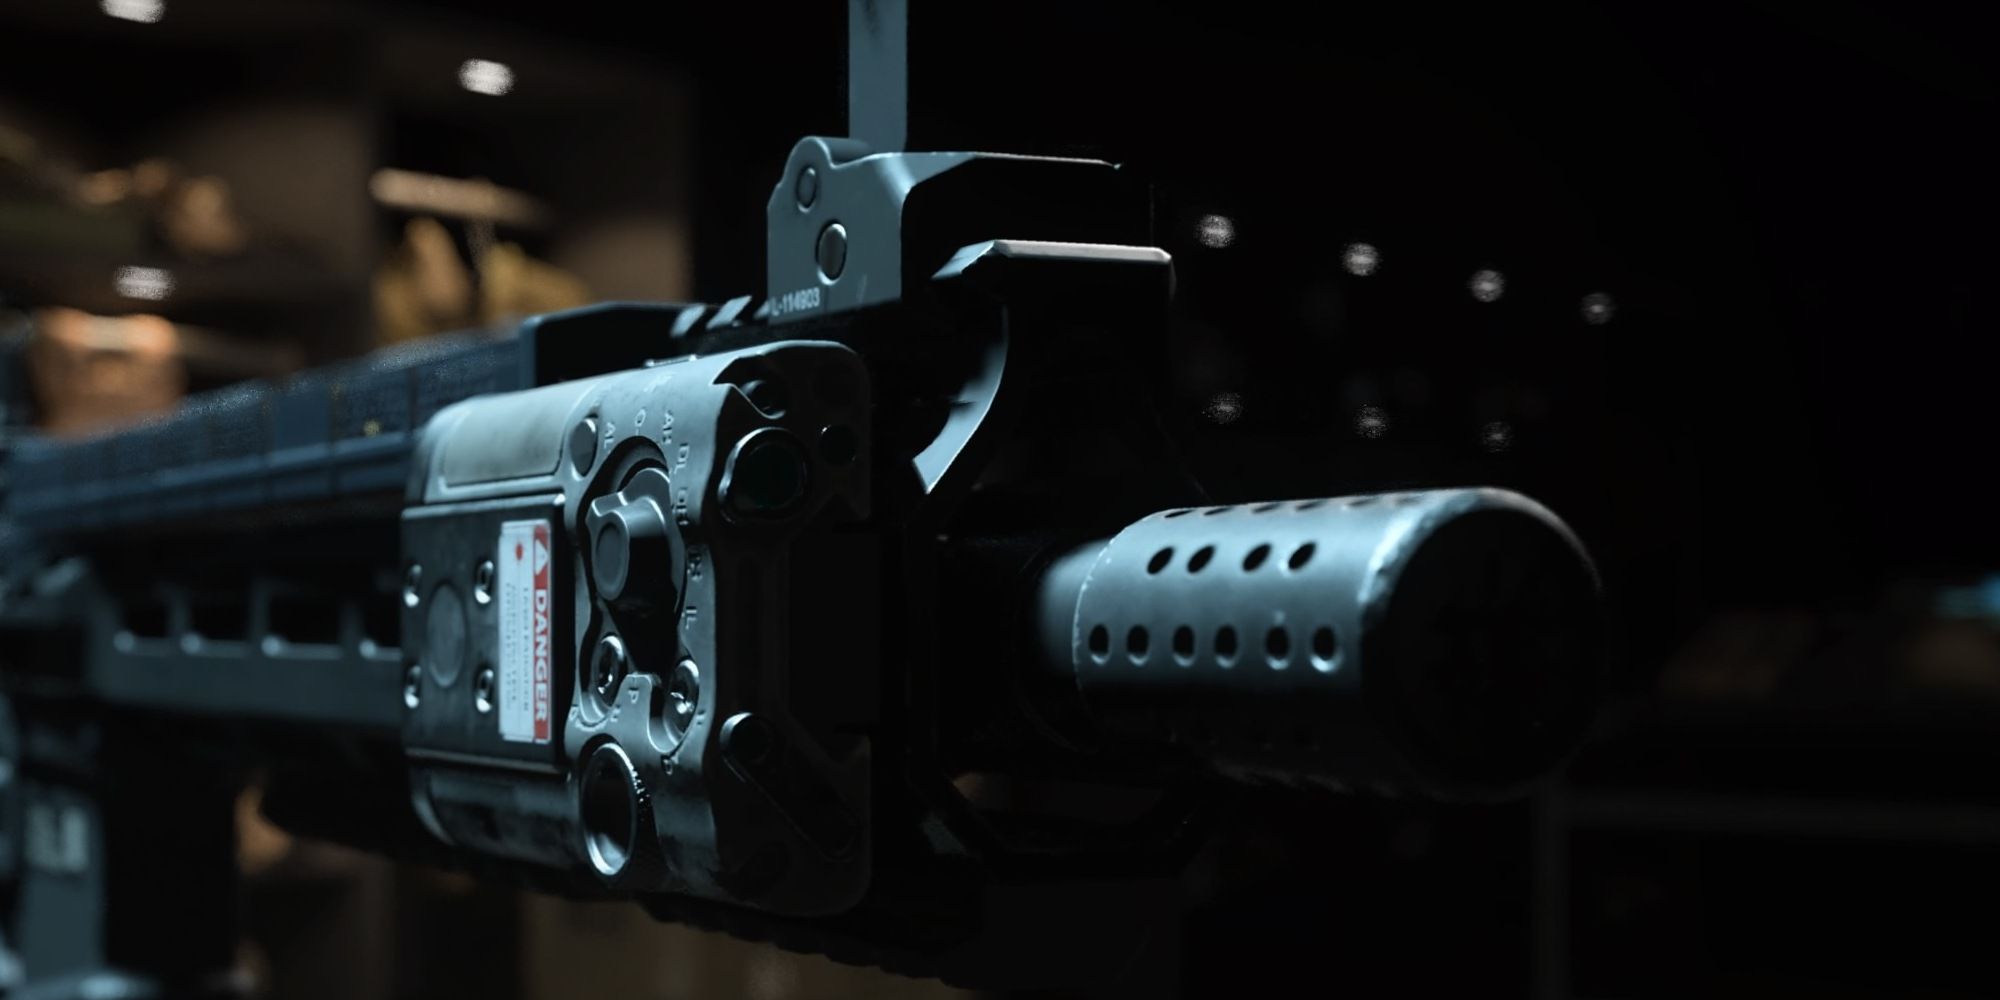 A 1MW laser box is attached to the side of the COD:MW2 weapon.